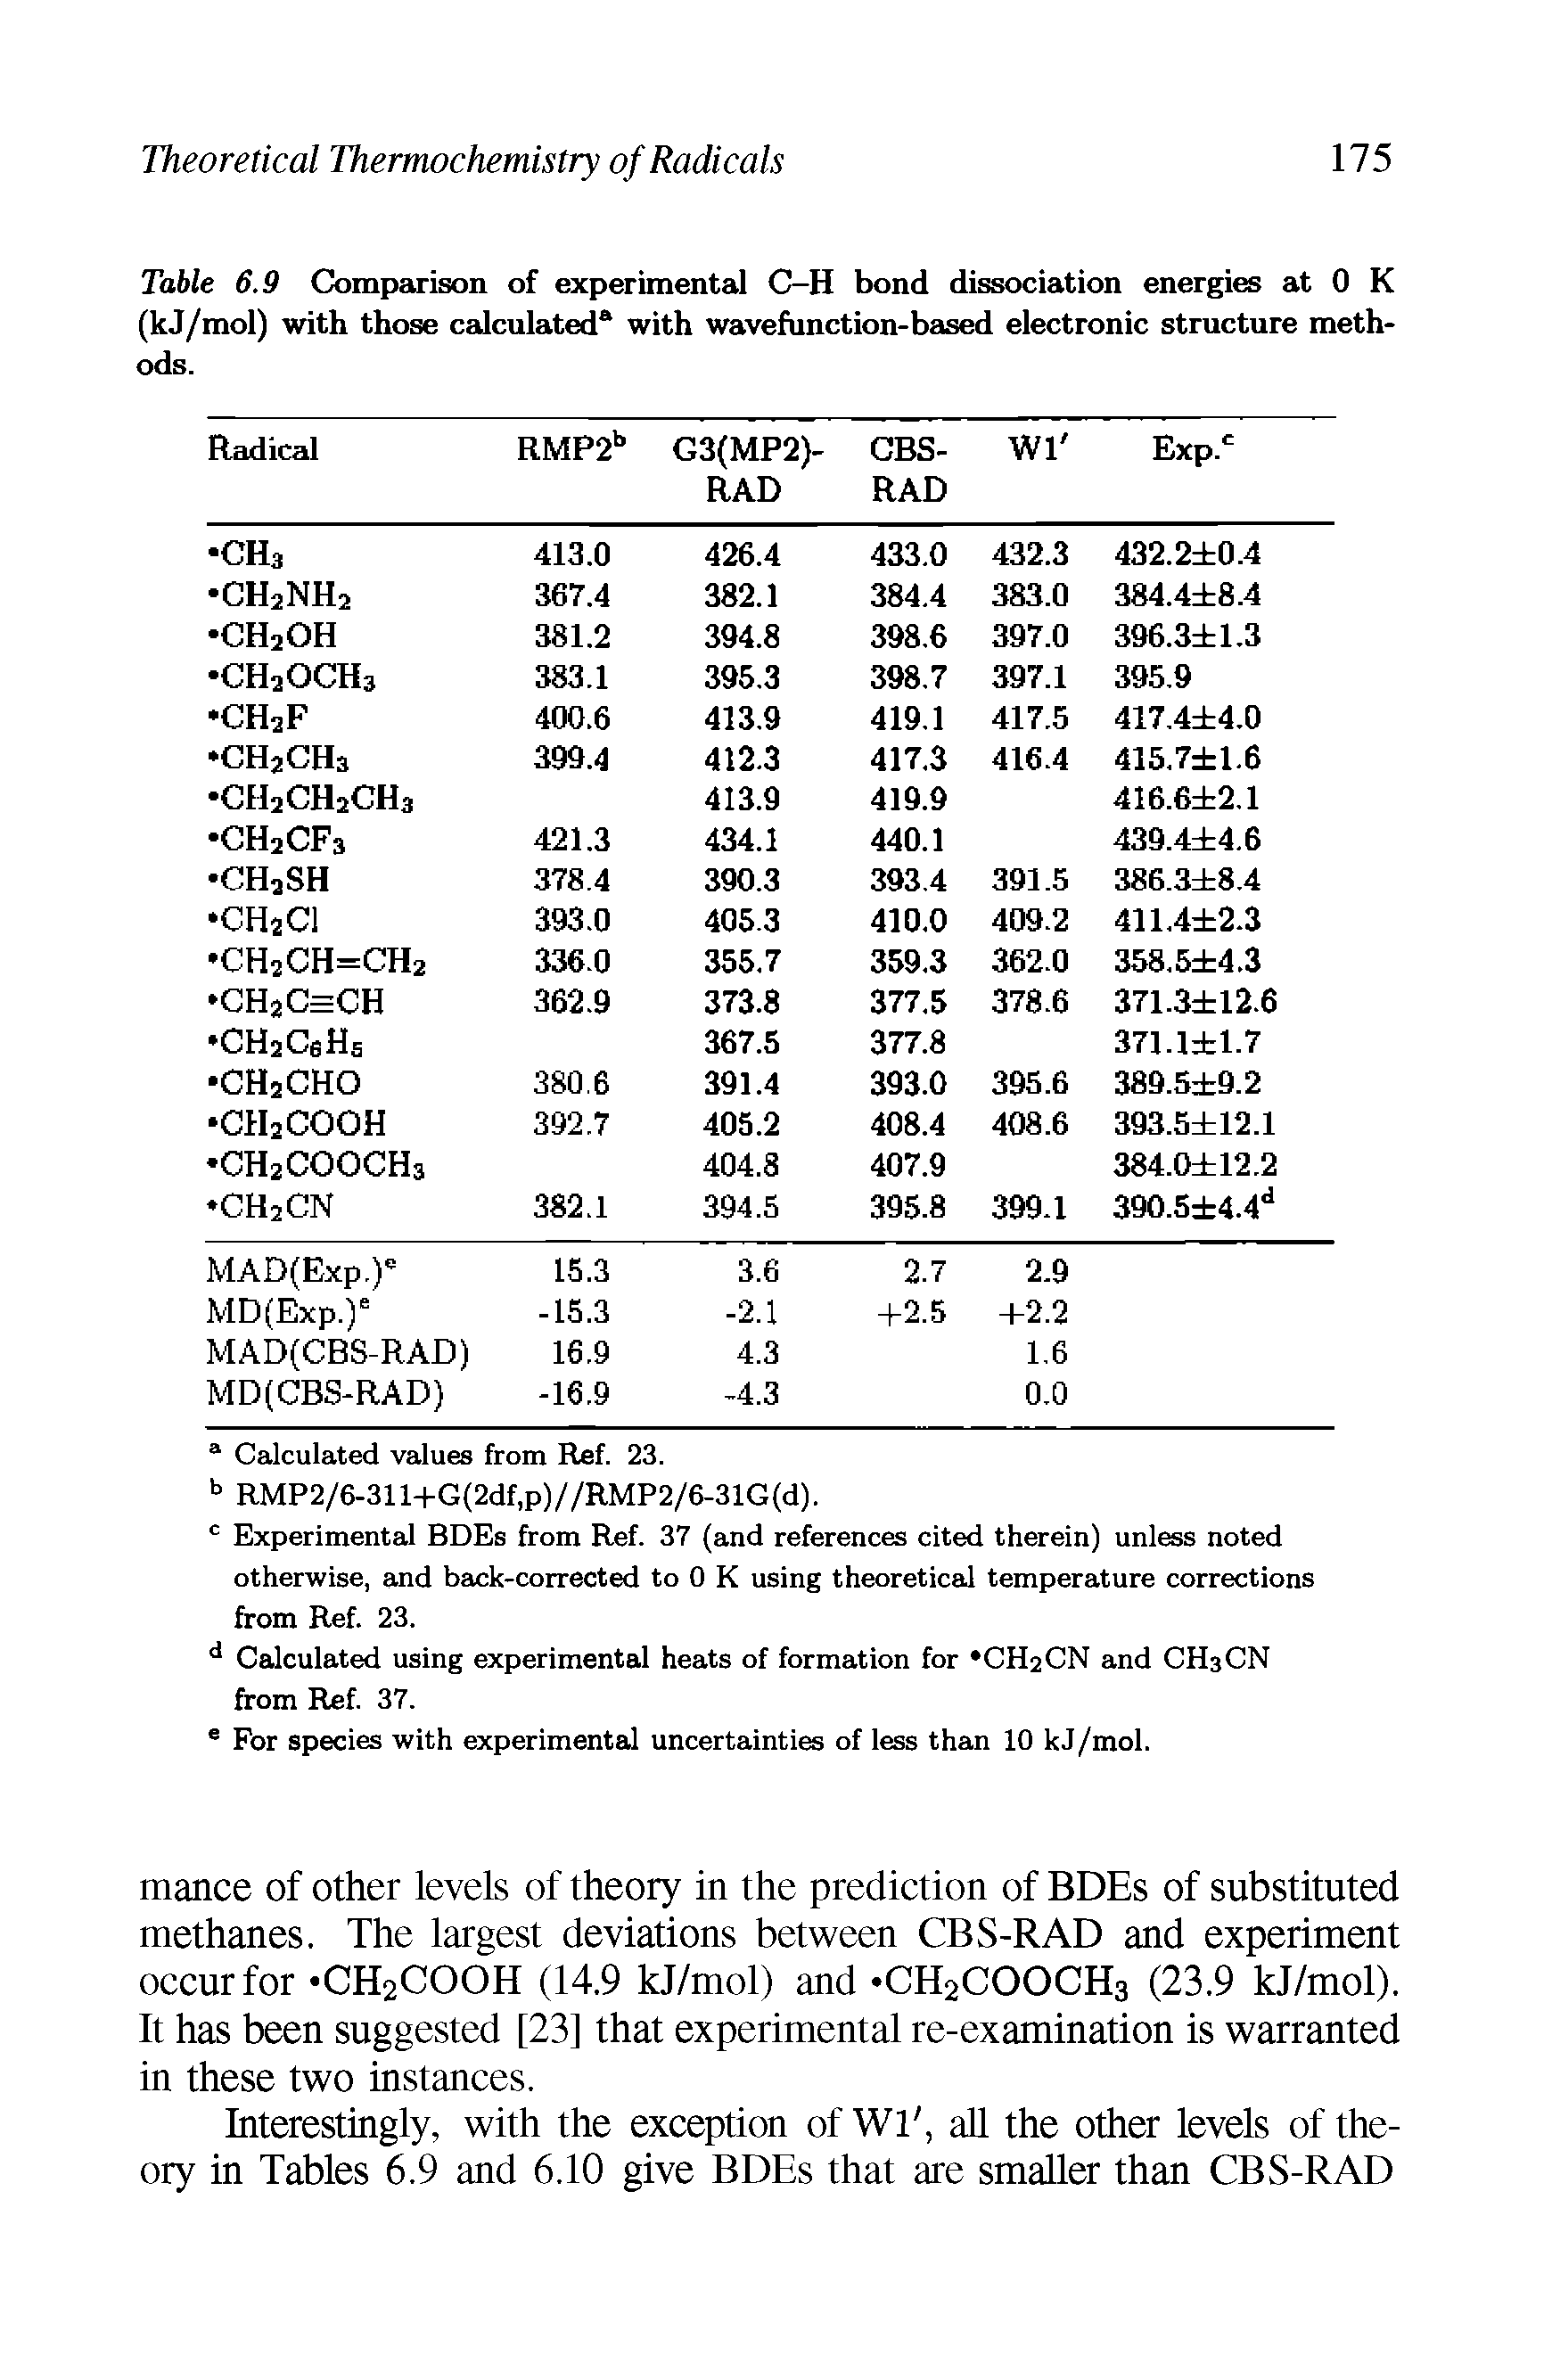 Table 6.9 Comparison of experimental C-H bond dissociation energies at 0 K (kJ/mol) with those calculated with wavefunction-based electronic structure methods.